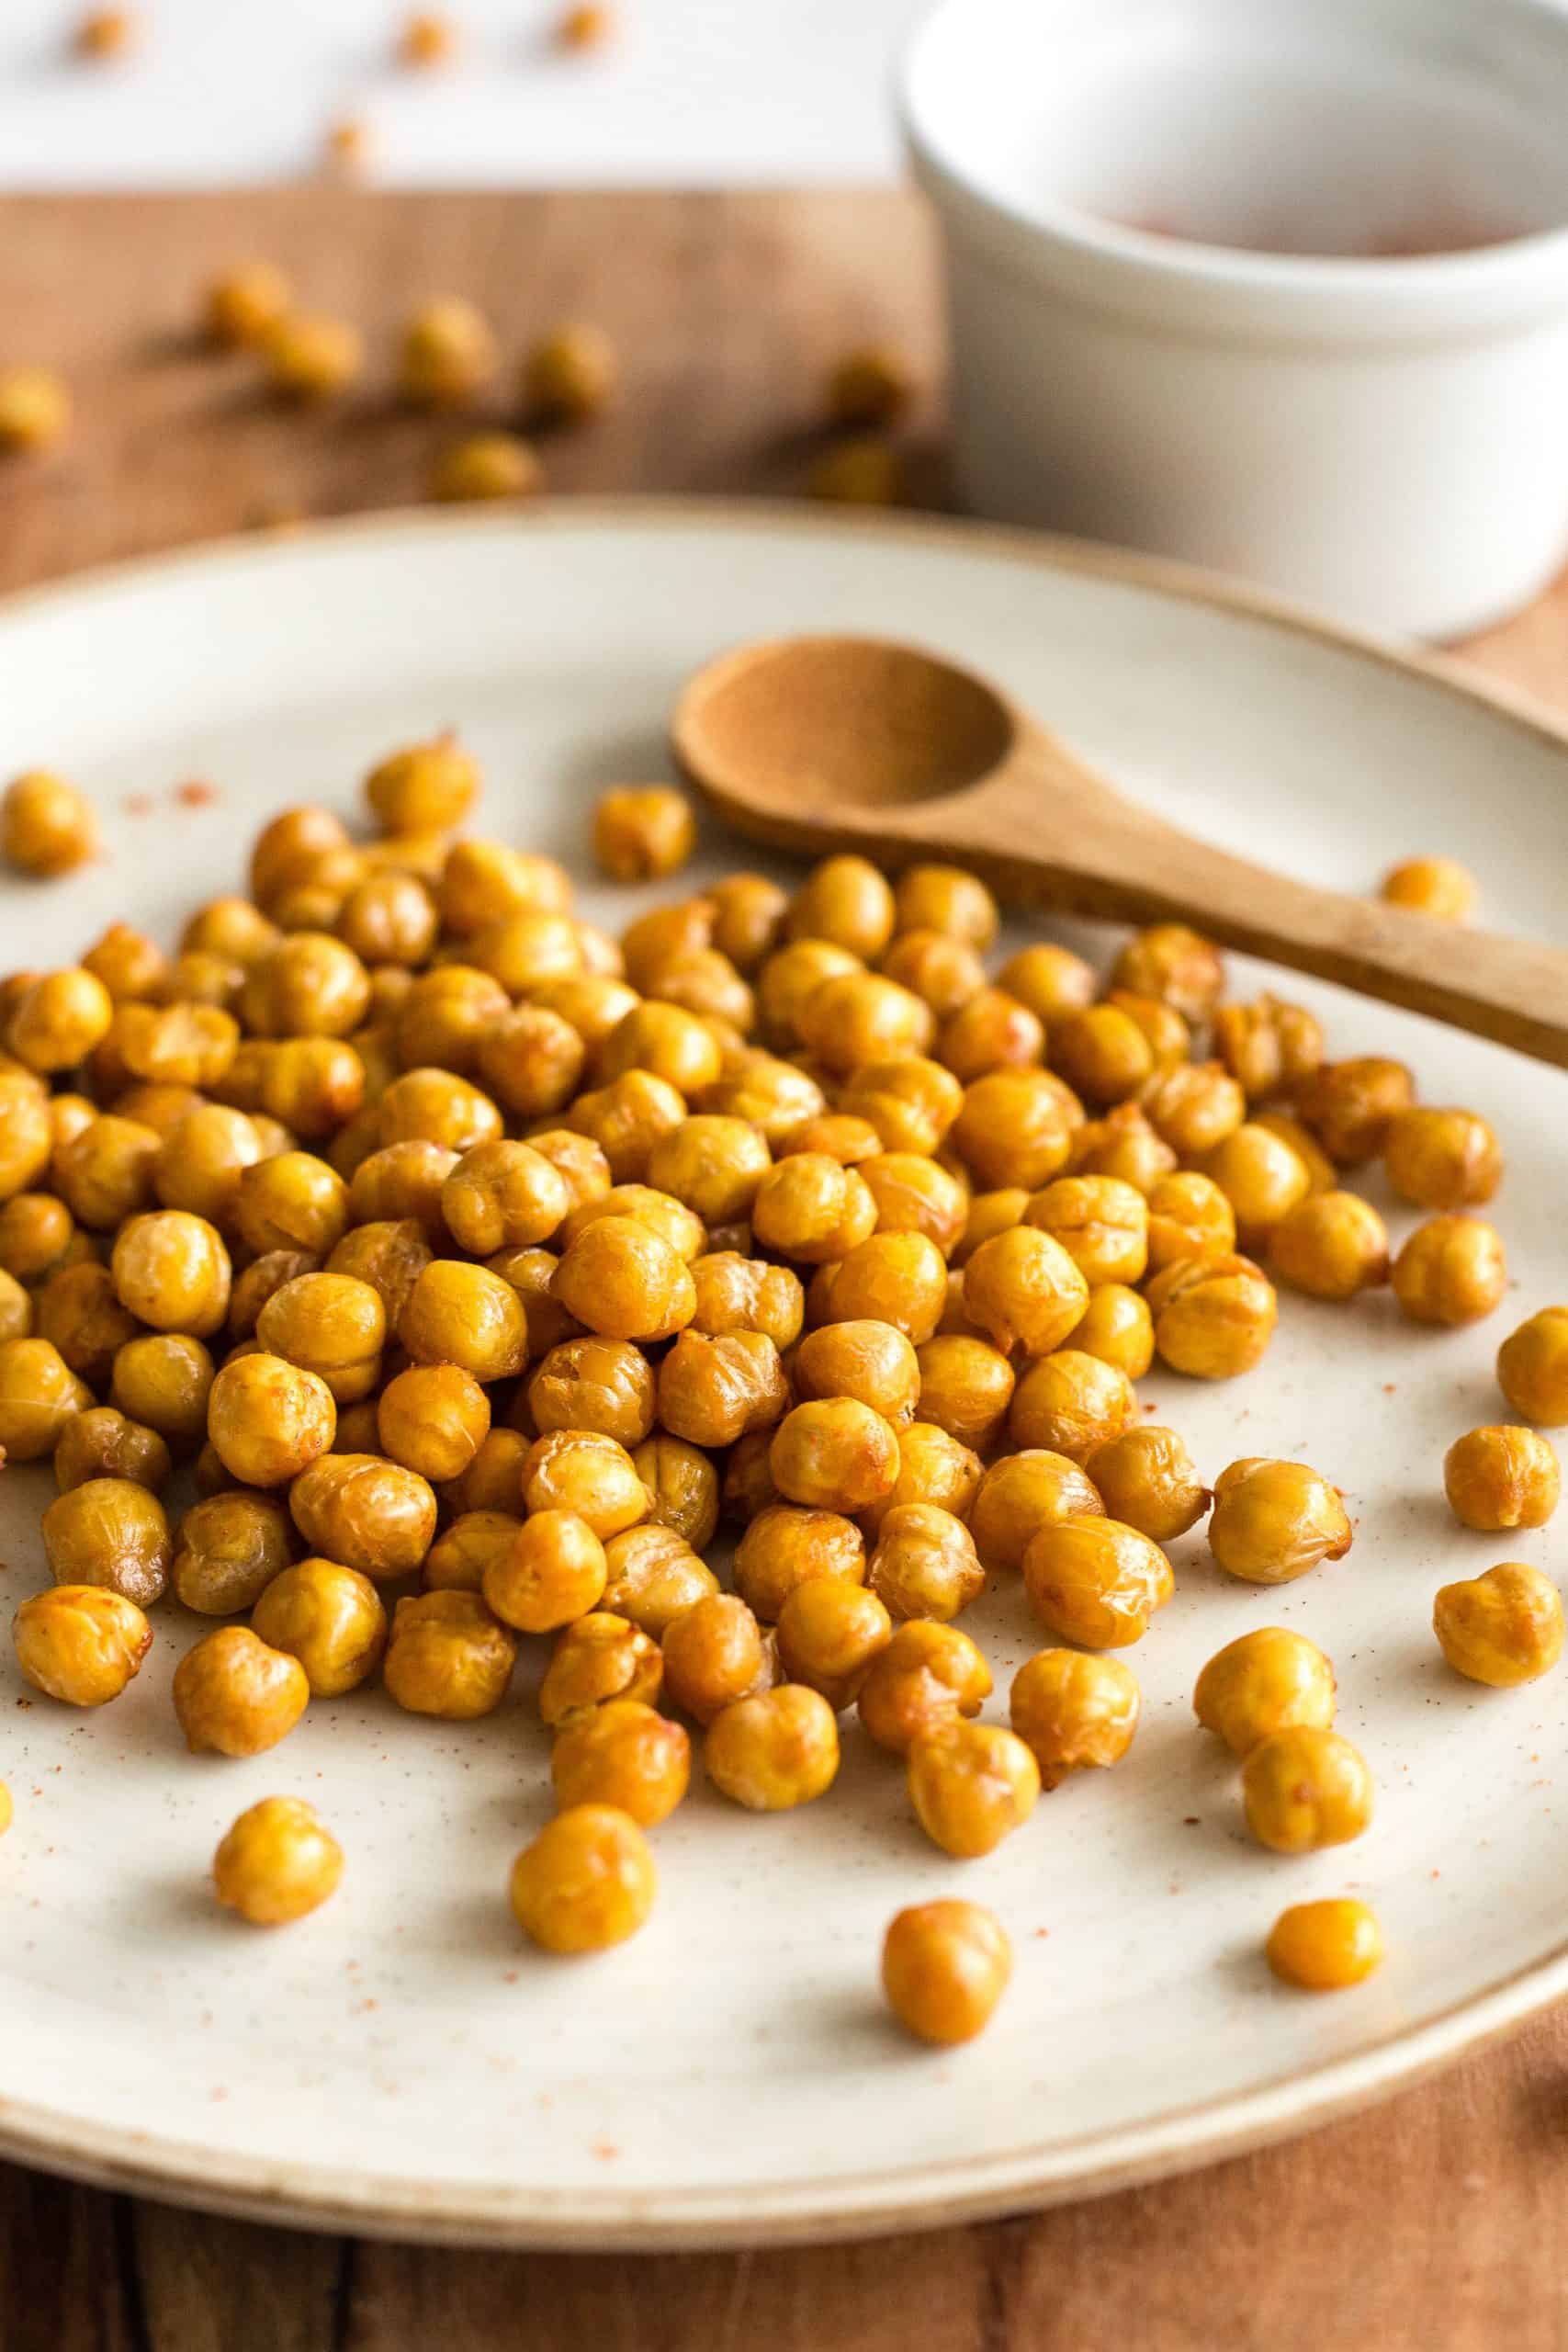 Up close shot of chickpeas on a plate.